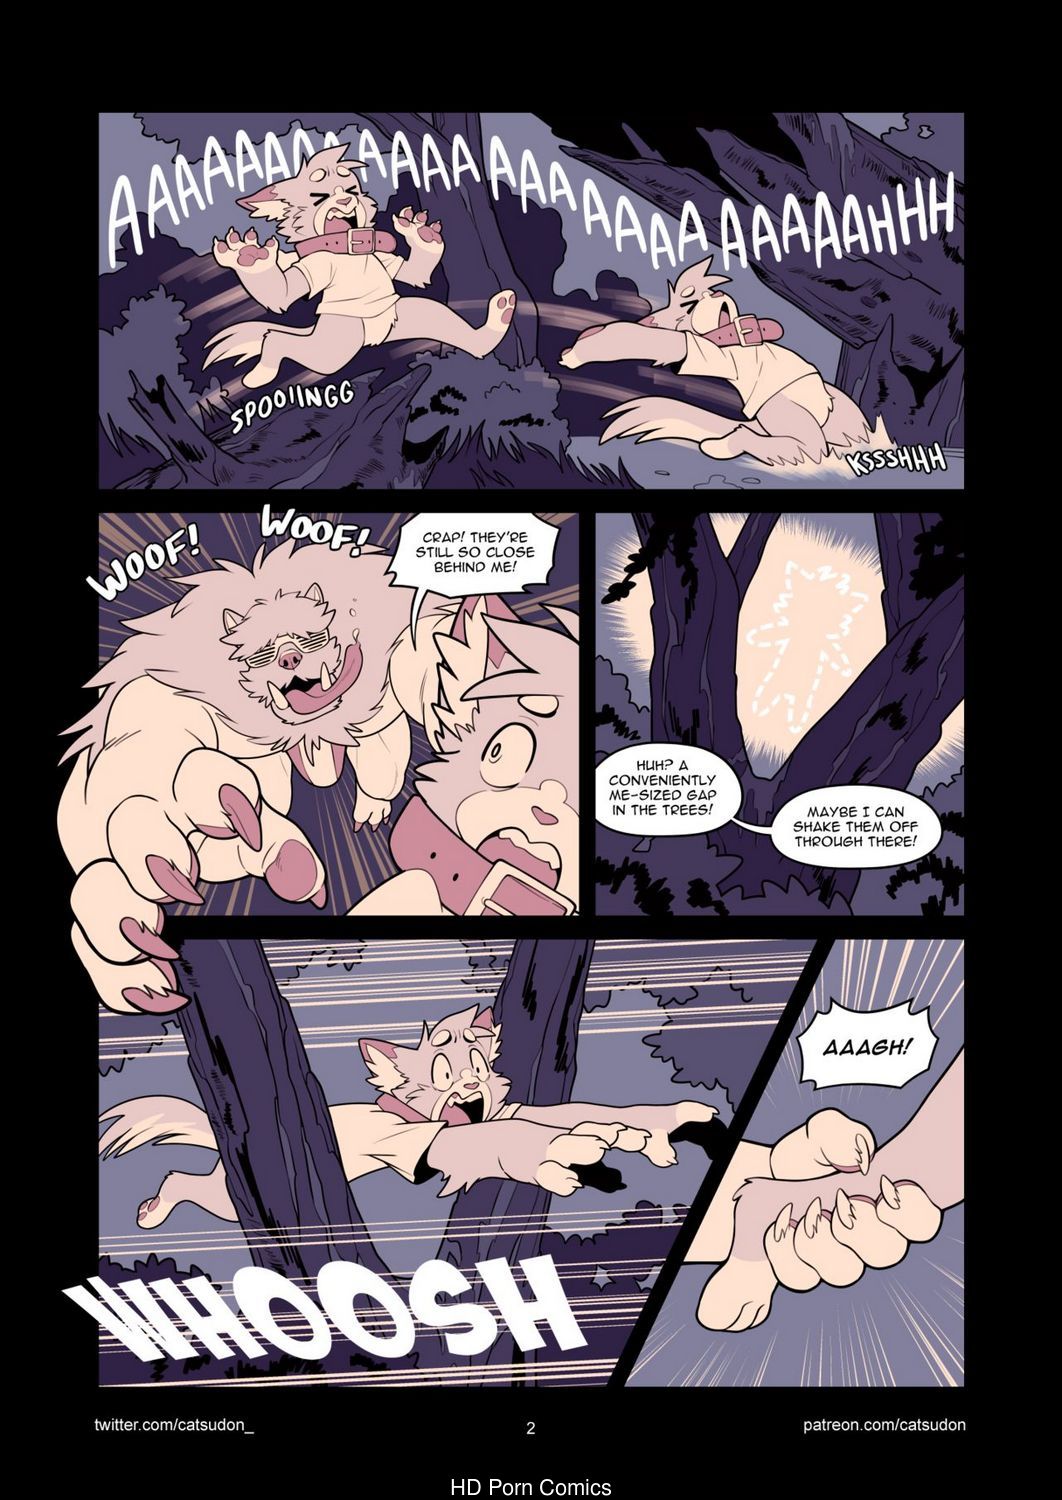 Furry Porn Comics Midnight Milkshake - Catsudon Gets Gangbanged In The Woods By Werewolves Who Are Also A Bunch Of  Dorks comic porn - HD Porn Comics